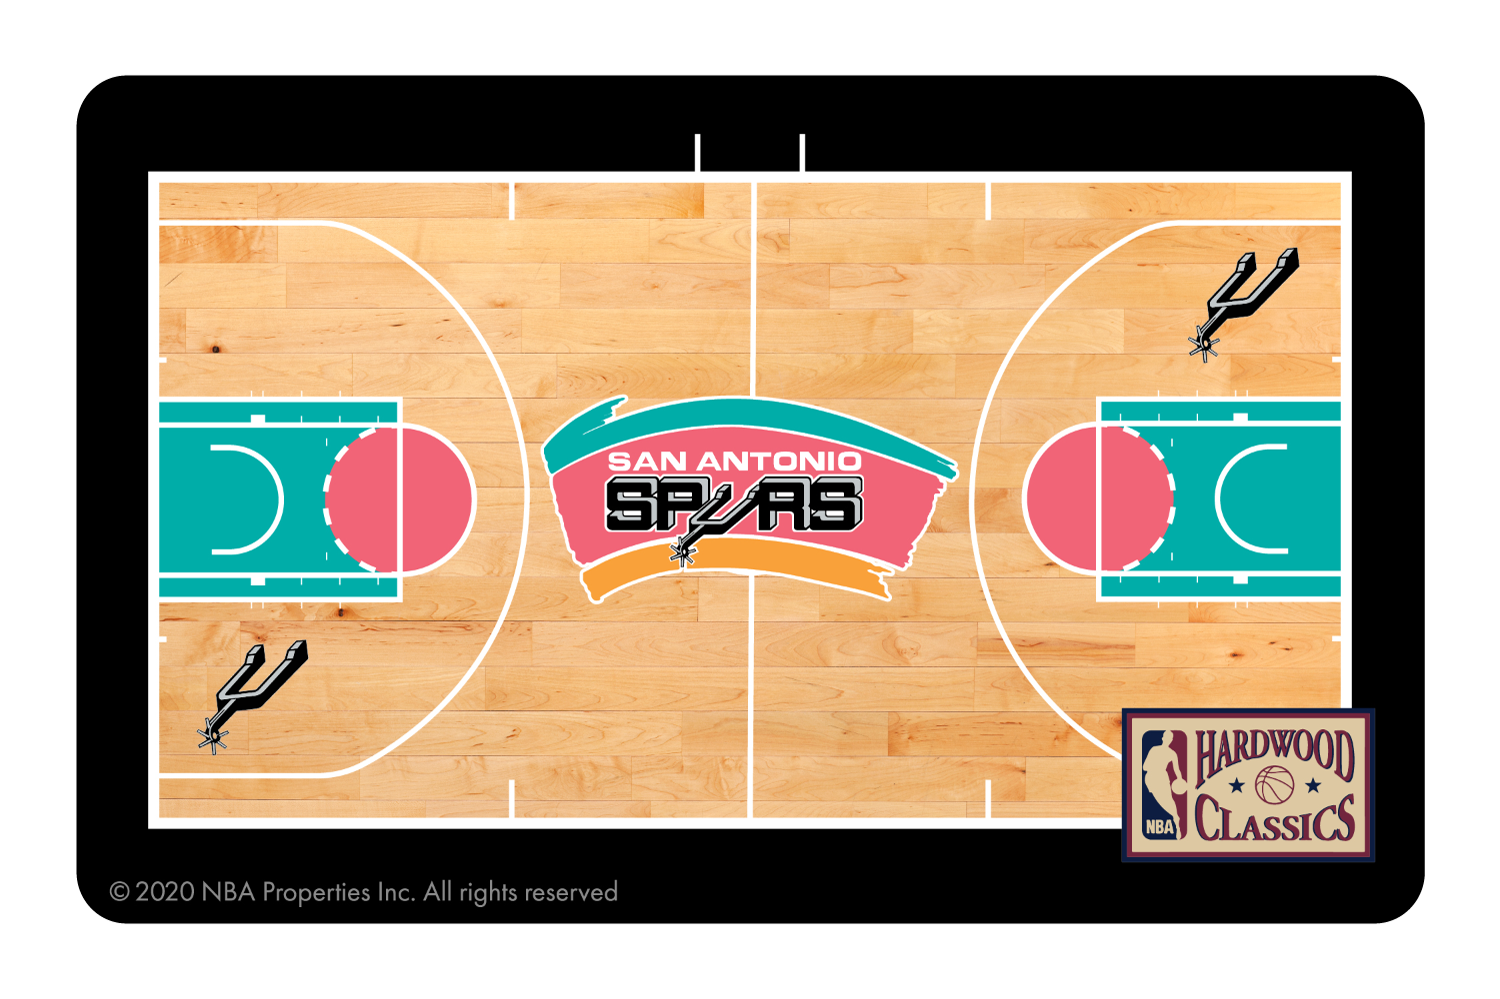 Credit Debit Card Skins | Cucu Covers - Customize Any Bank Card - San Antonio Spurs: Retro Courtside Hardwood Classics Full Cover / Small Chip